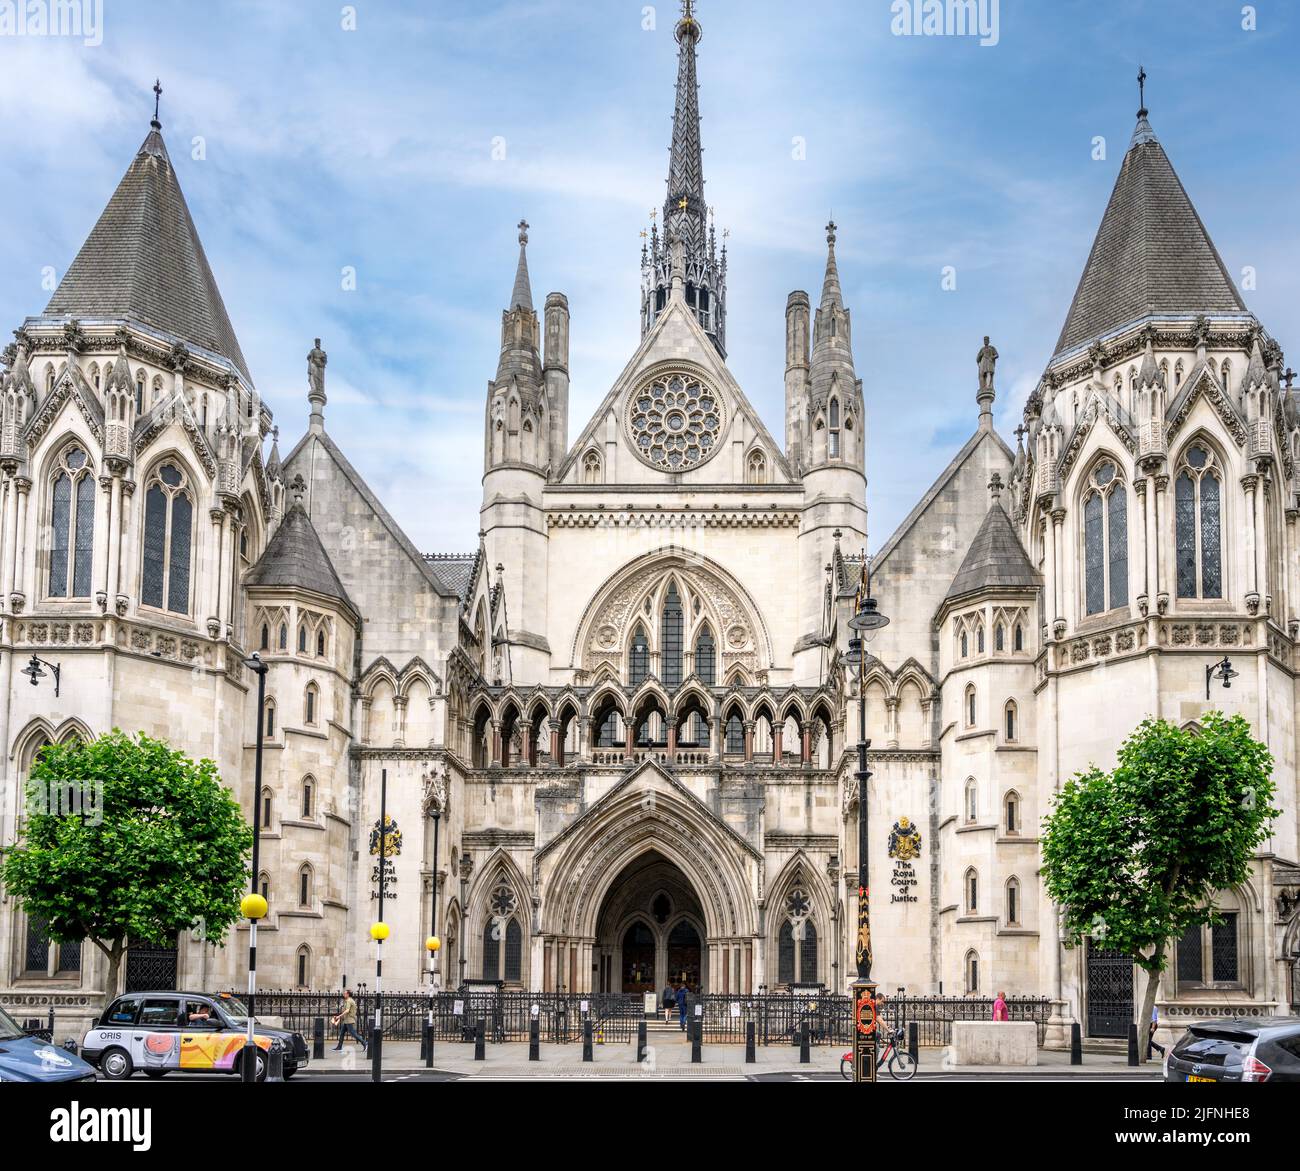 The Royal courts of Justice, The Strand, Londres, Angleterre, Royaume-Uni Banque D'Images